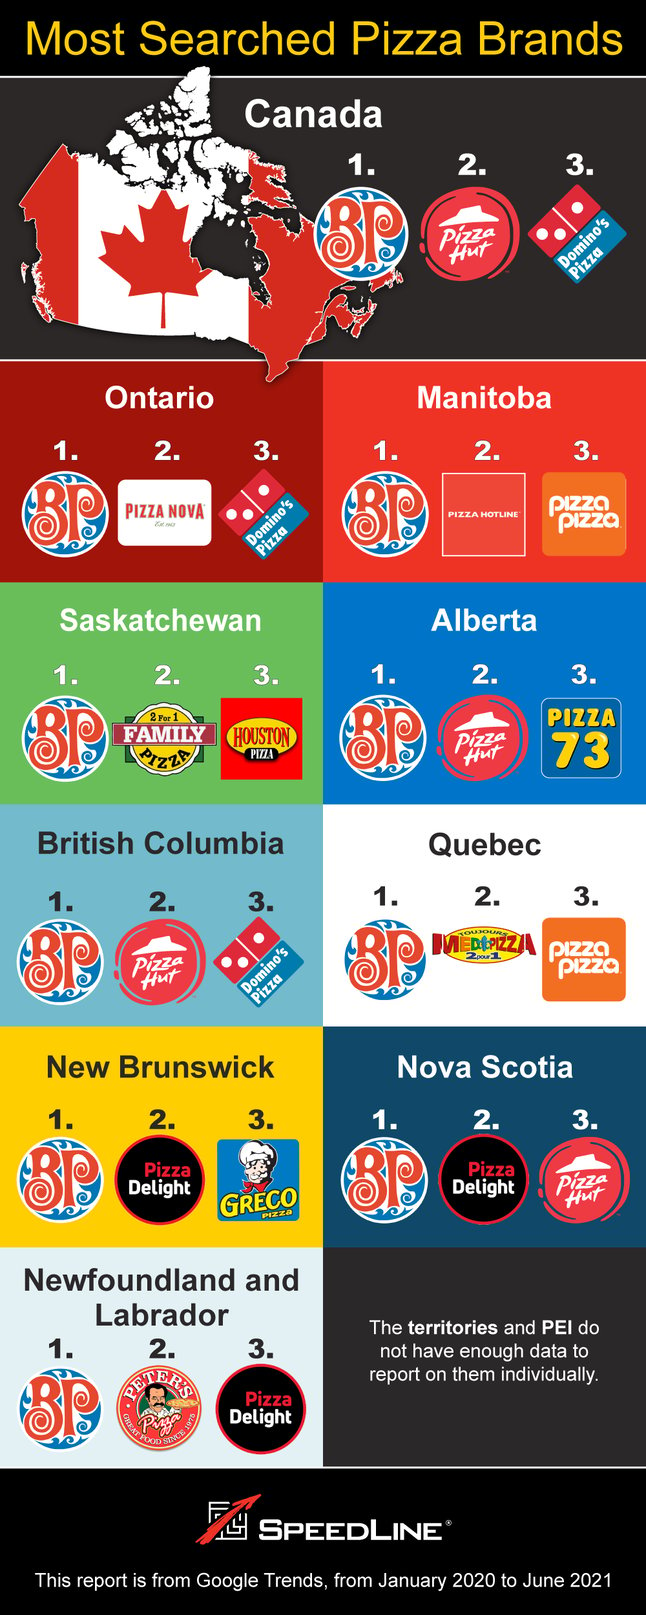 The most searched pizza brands in Canada